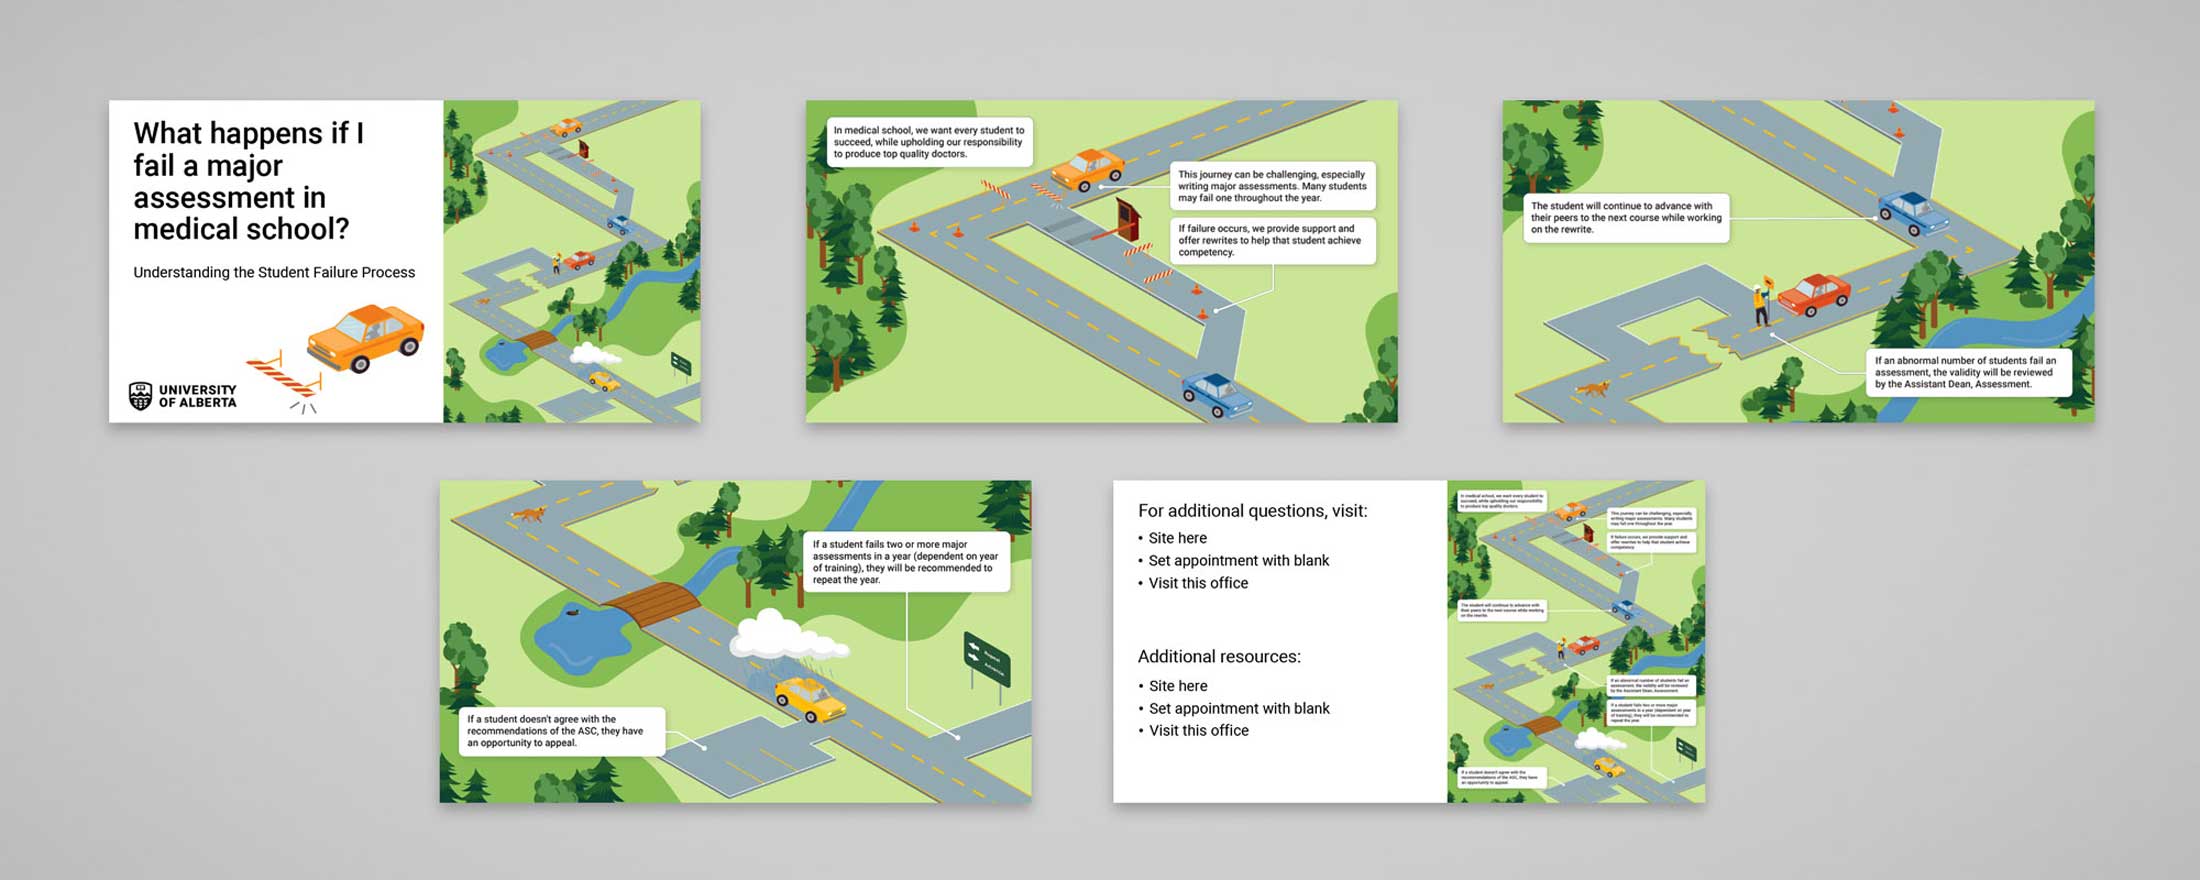 5 screen captures of the slides designed for the project, depicting a stylized road with cars and obstacles